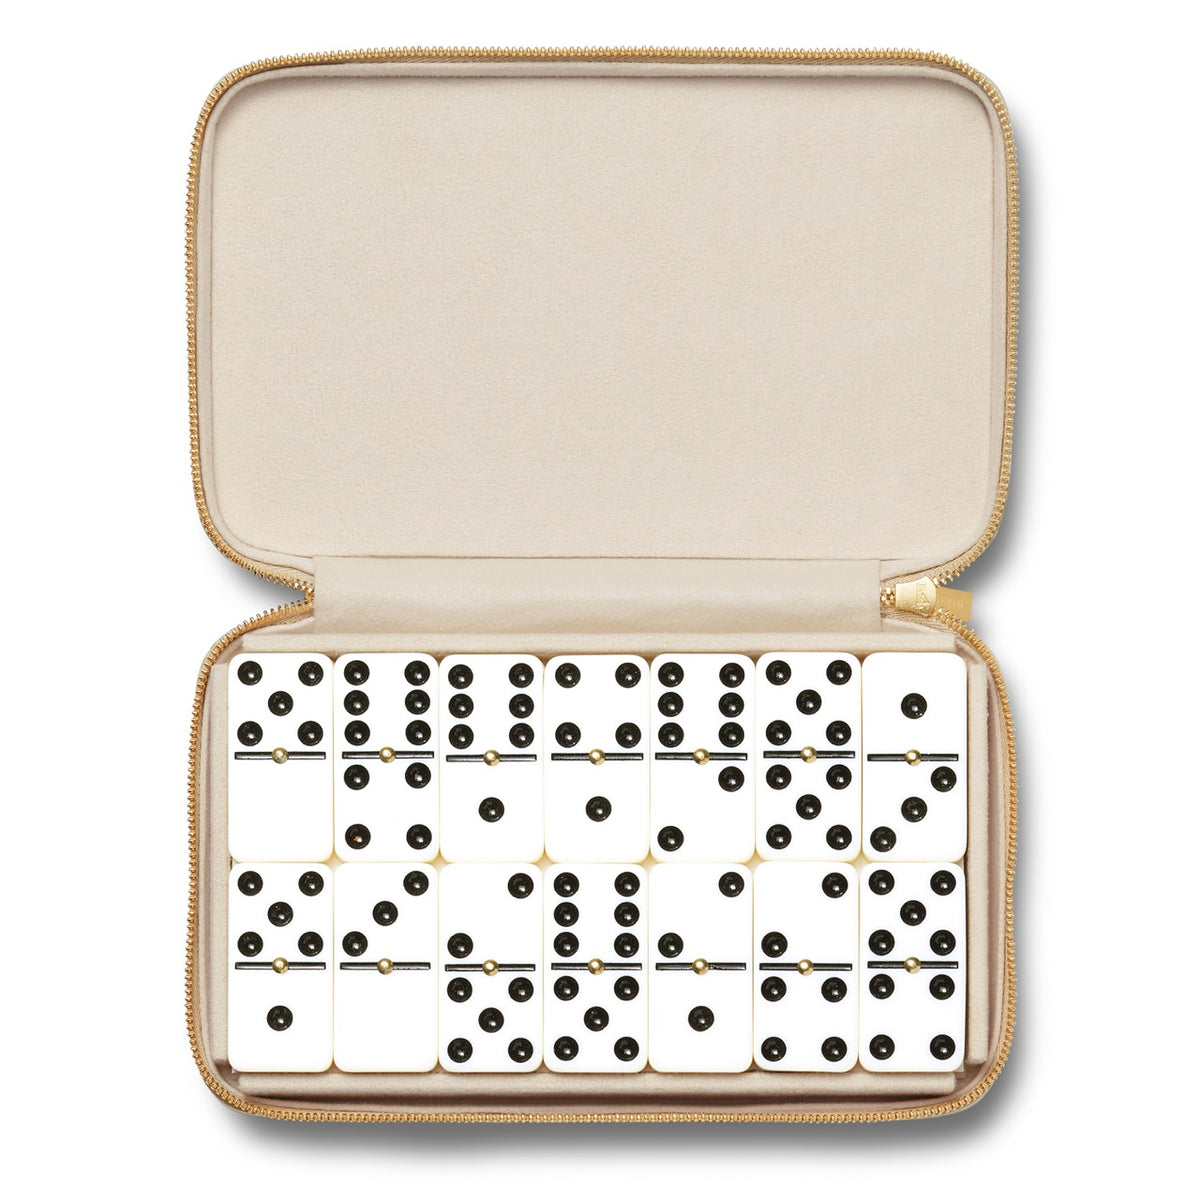 Enzo Travel Domino Set in Fawn